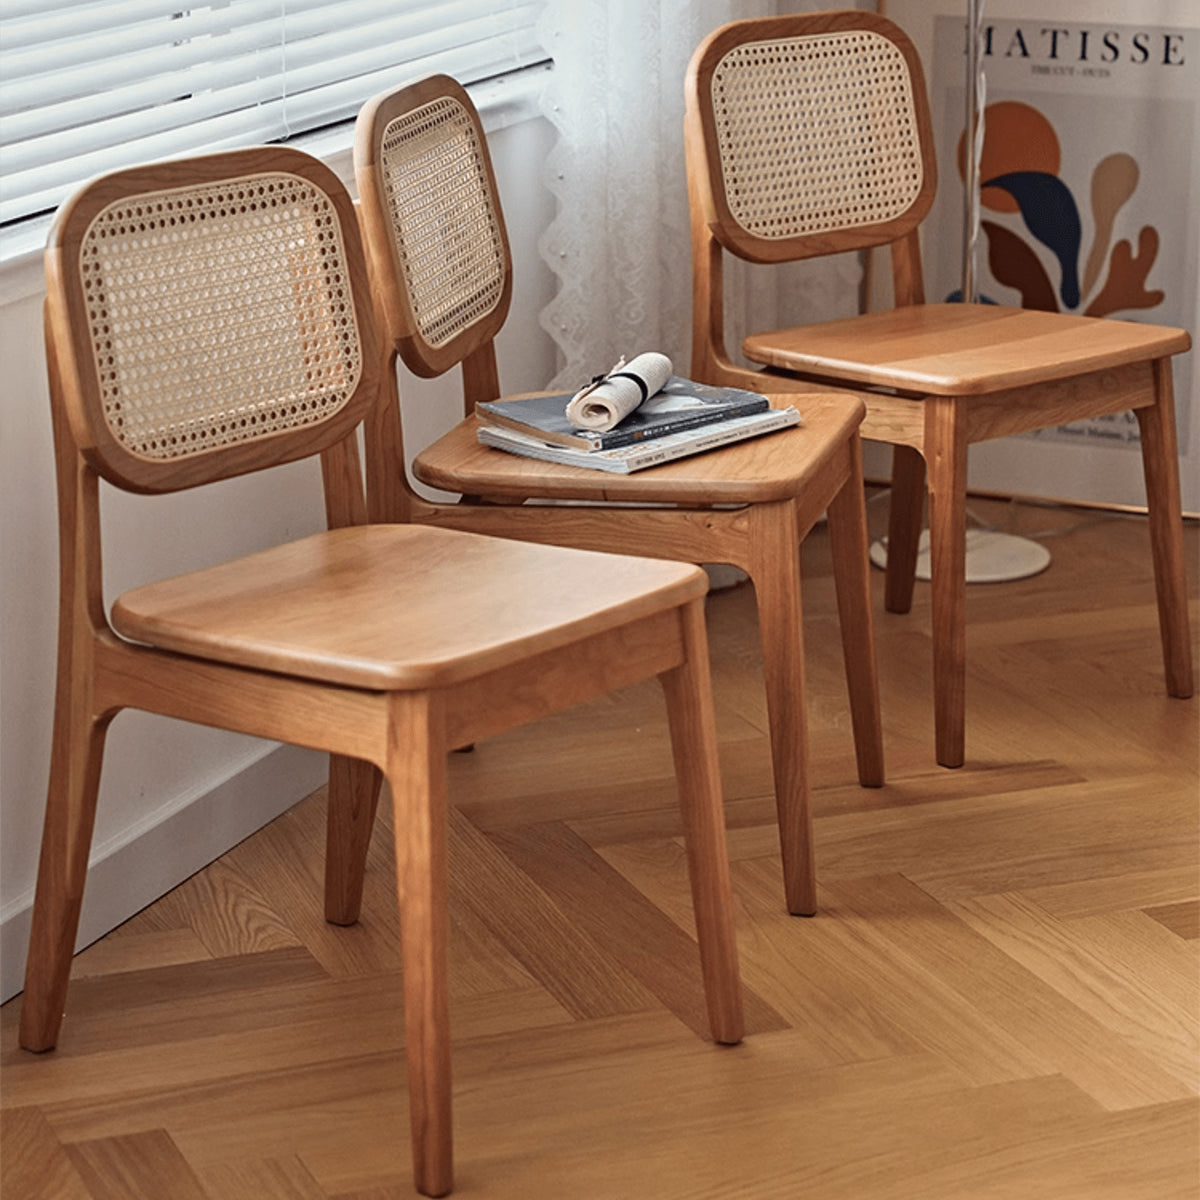 Elegant Cherry Wood Chair with Natural Rattan Accent fyg-661